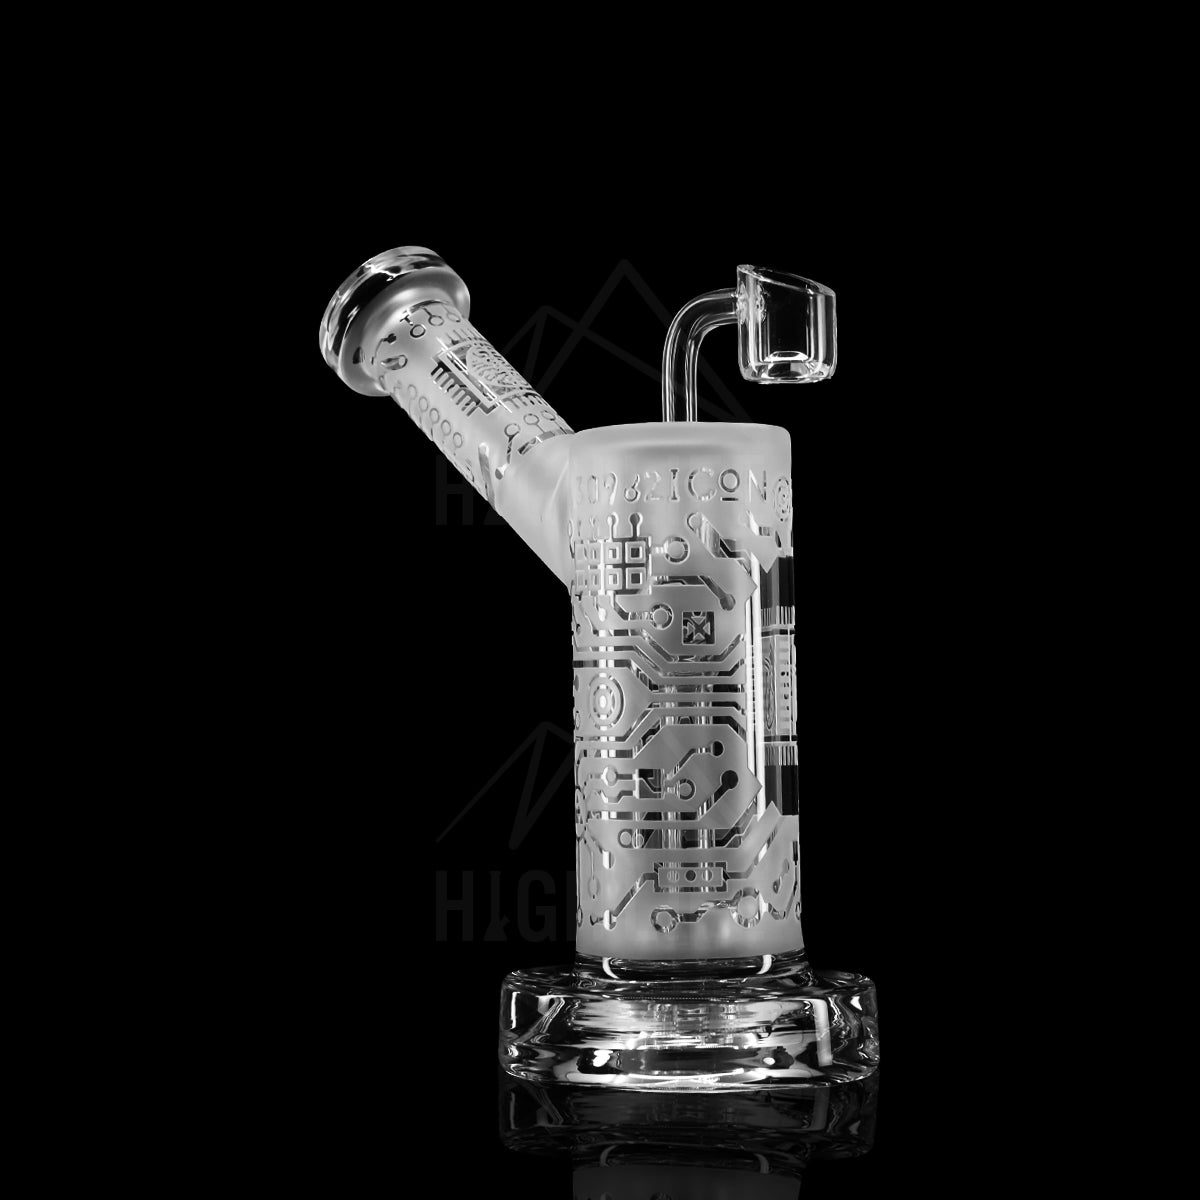 7" Microchip Etched Dab Rig